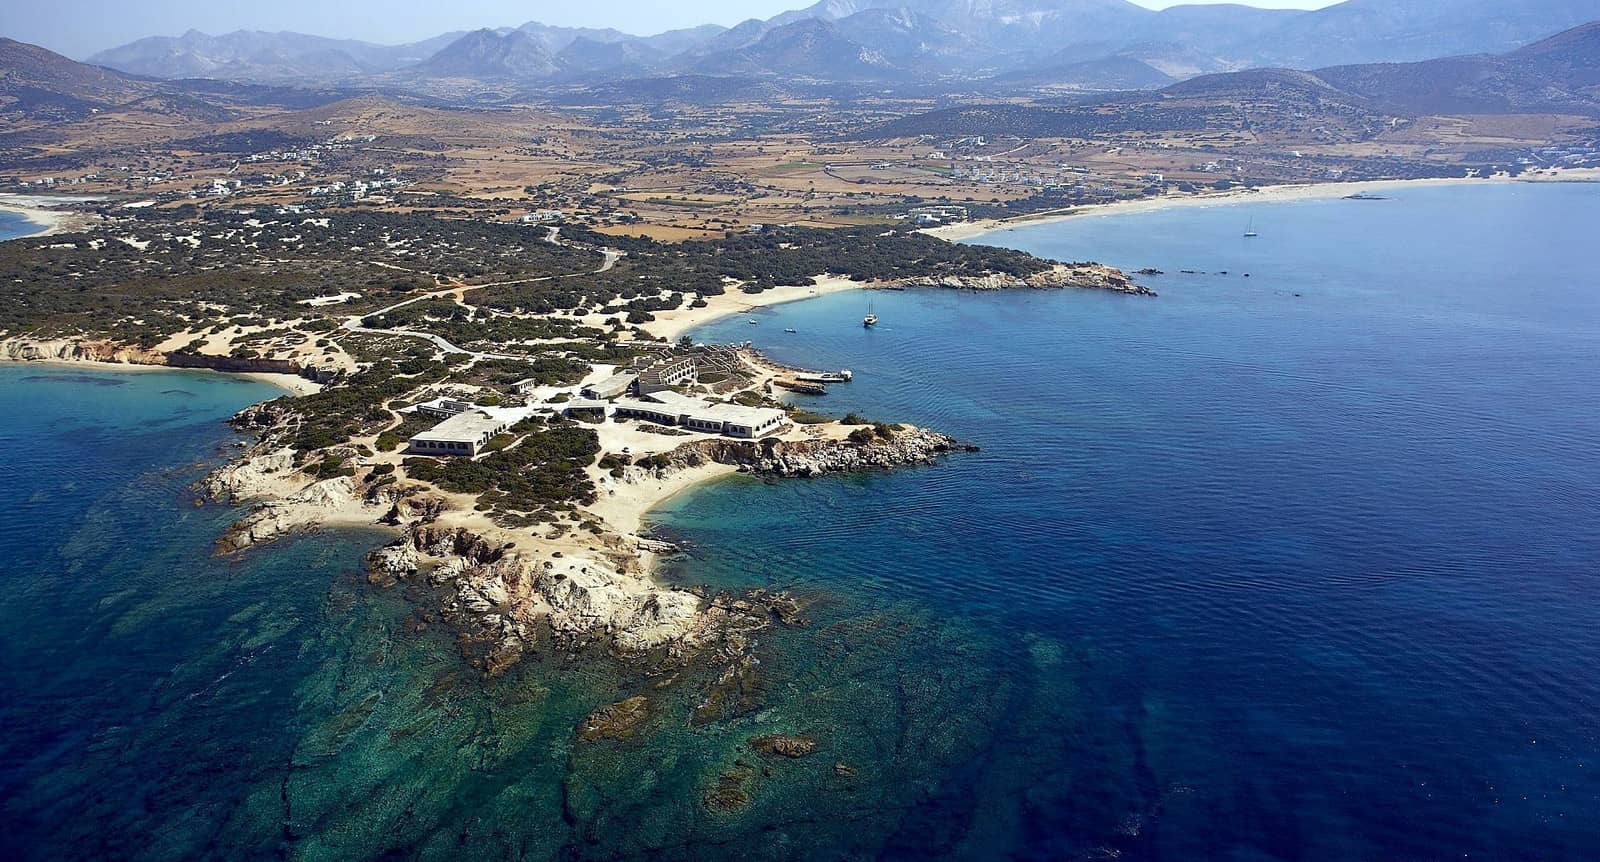 Naxos island sailing holidays and yacht charters guide to yachting in the Cyclades, Greece